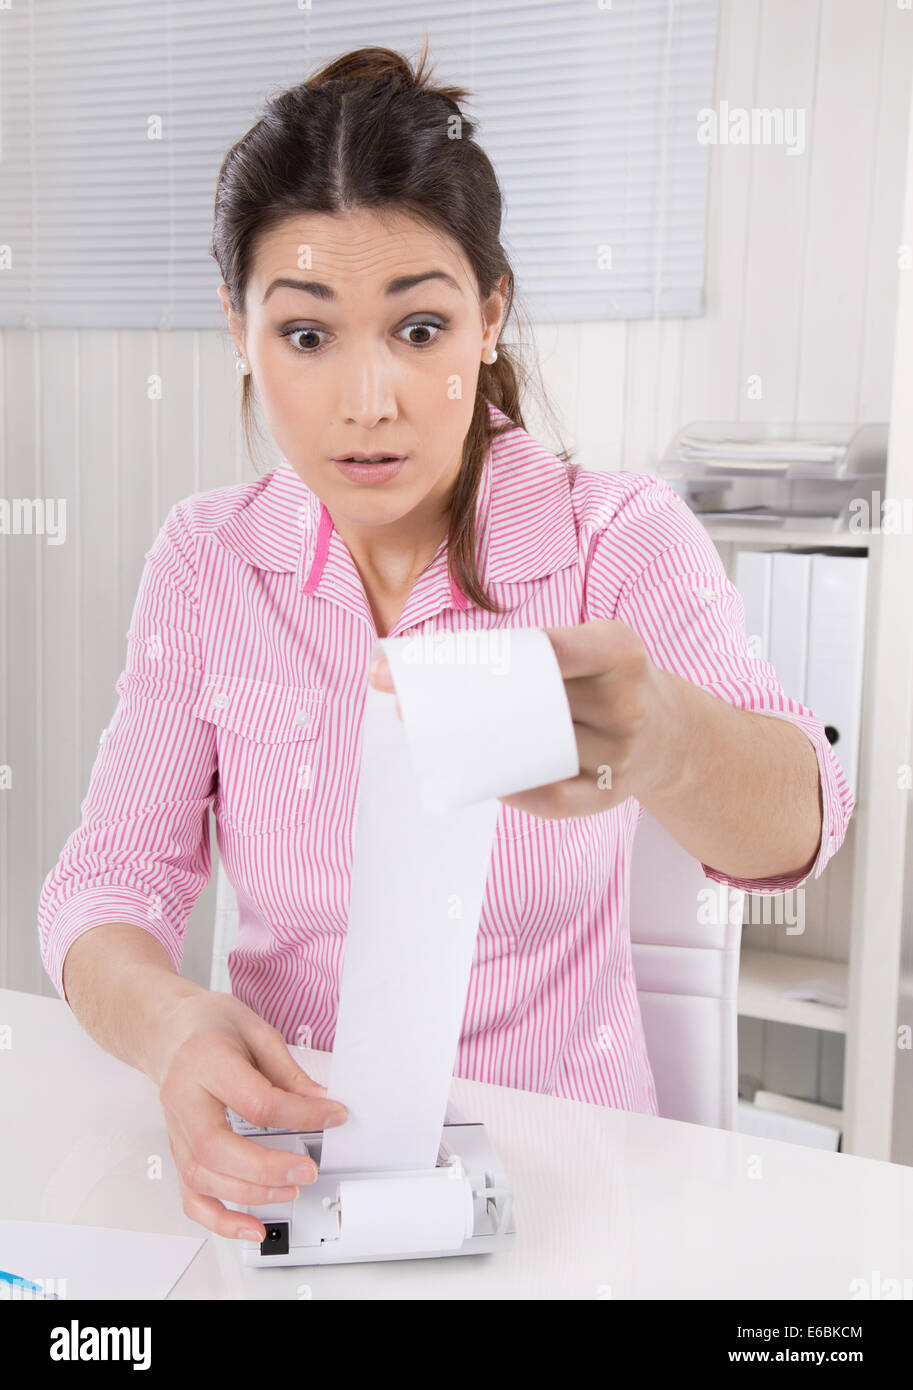 Shocked business woman looking at increasing costs in her company wearing pink blouse. Stock Photo